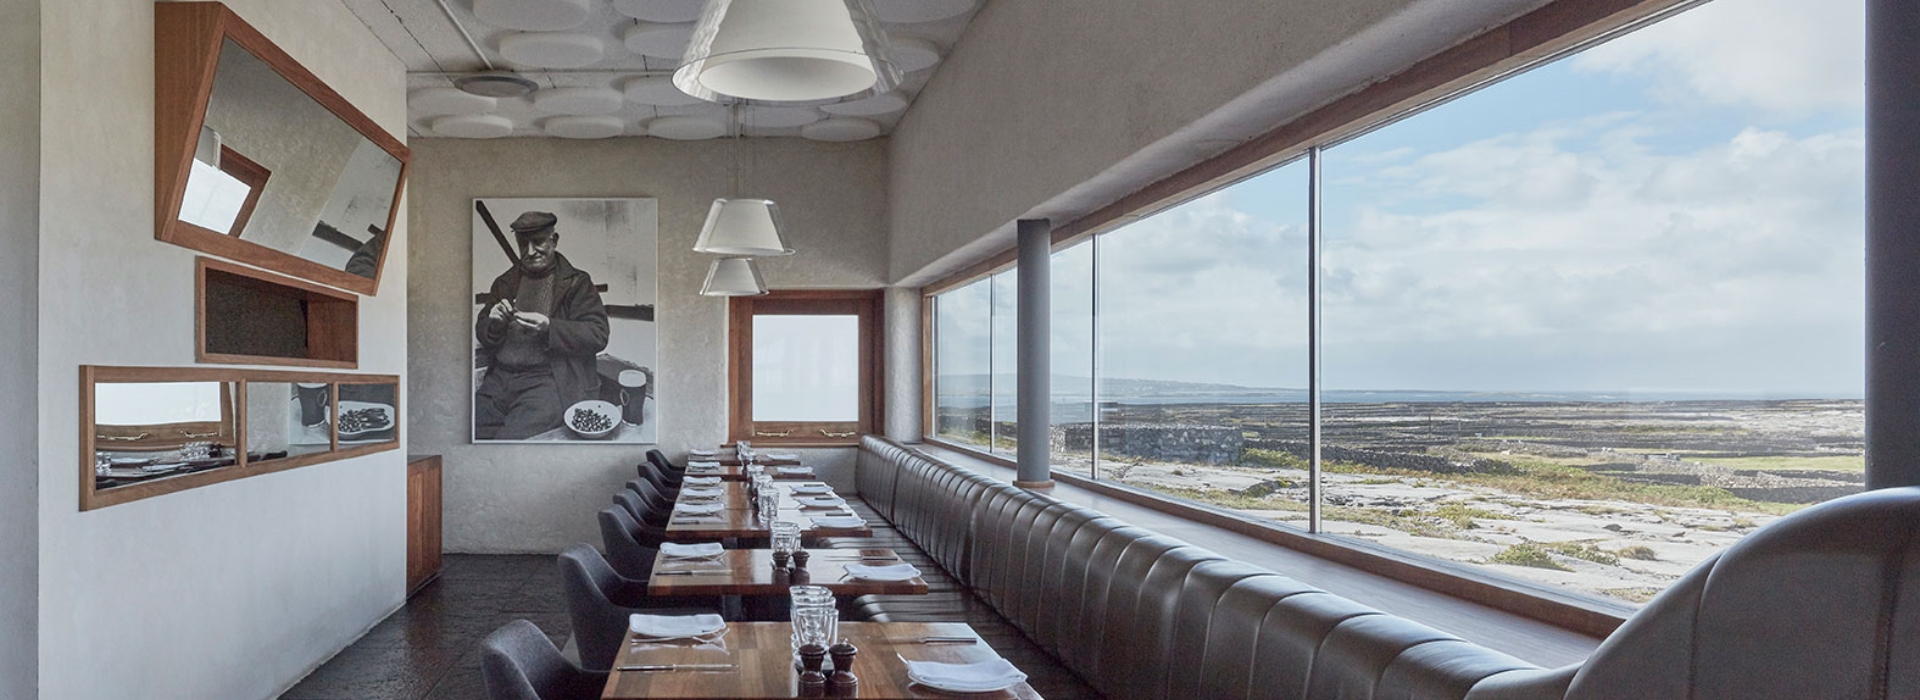 A Luxury Getaway to the Inis Meáin Restaurant & Suites in the Aran Islands in Ireland